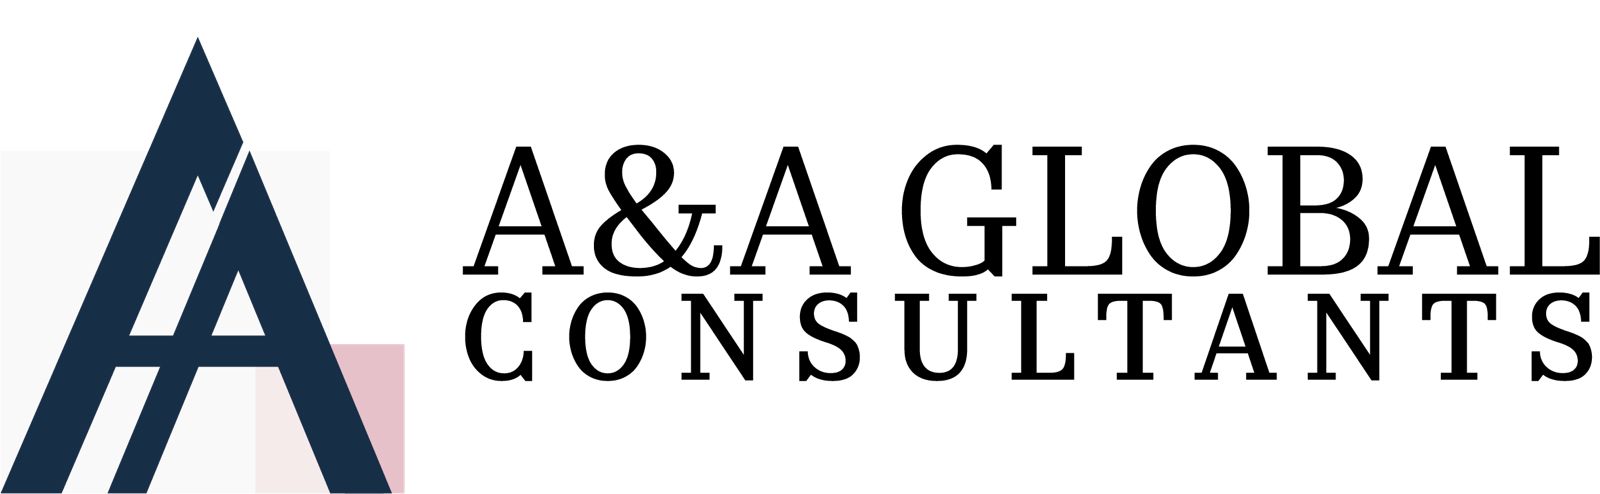 A&A Global Consultants